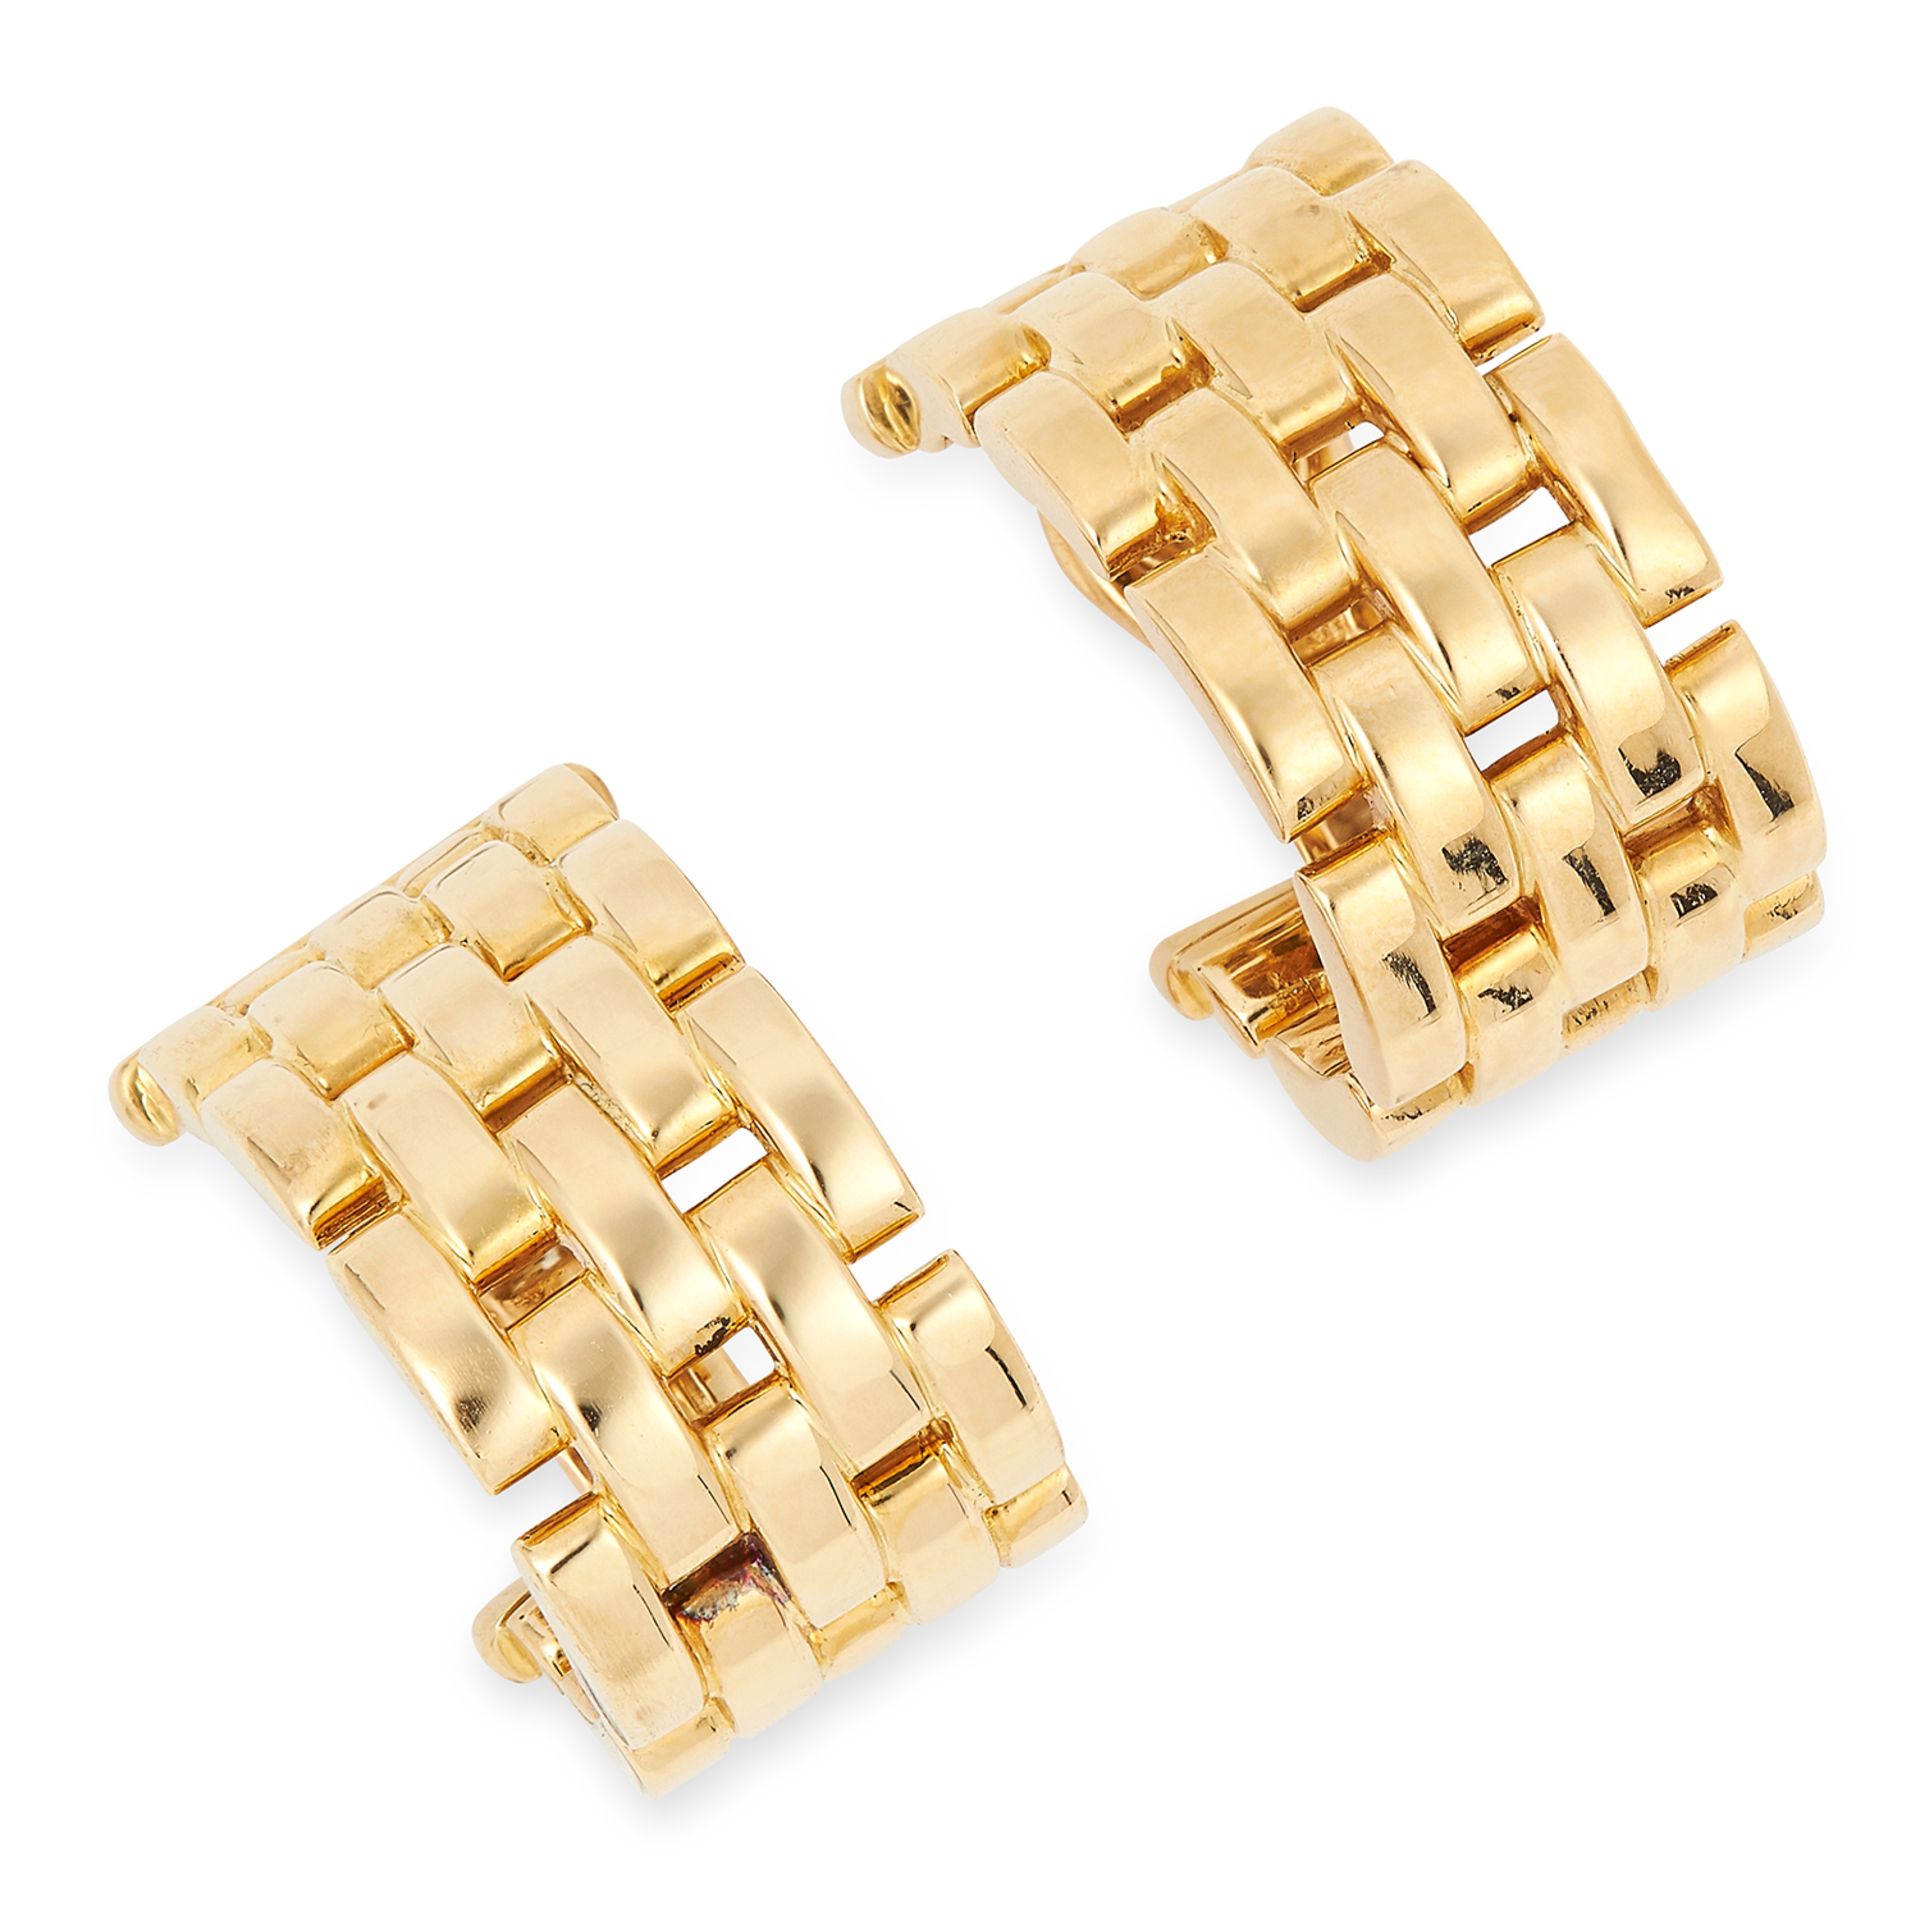 A PAIR OF MAILLON PANTHERE HOOP EARRINGS, CARTIER each designed as an incomplete hoop of alternating